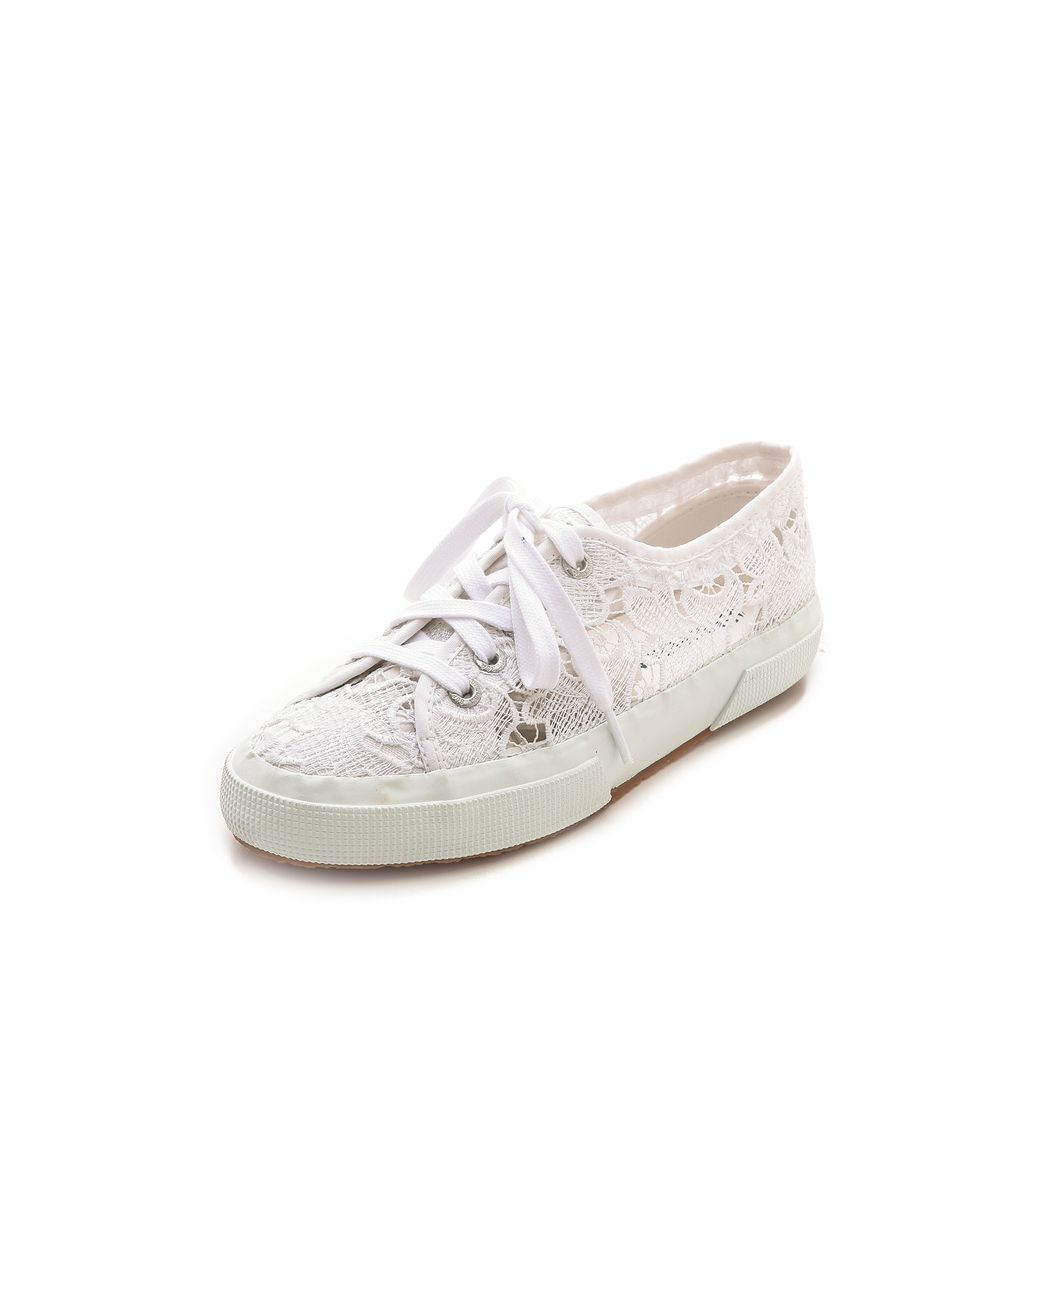 Superga Lace Sneakers in White Lyst